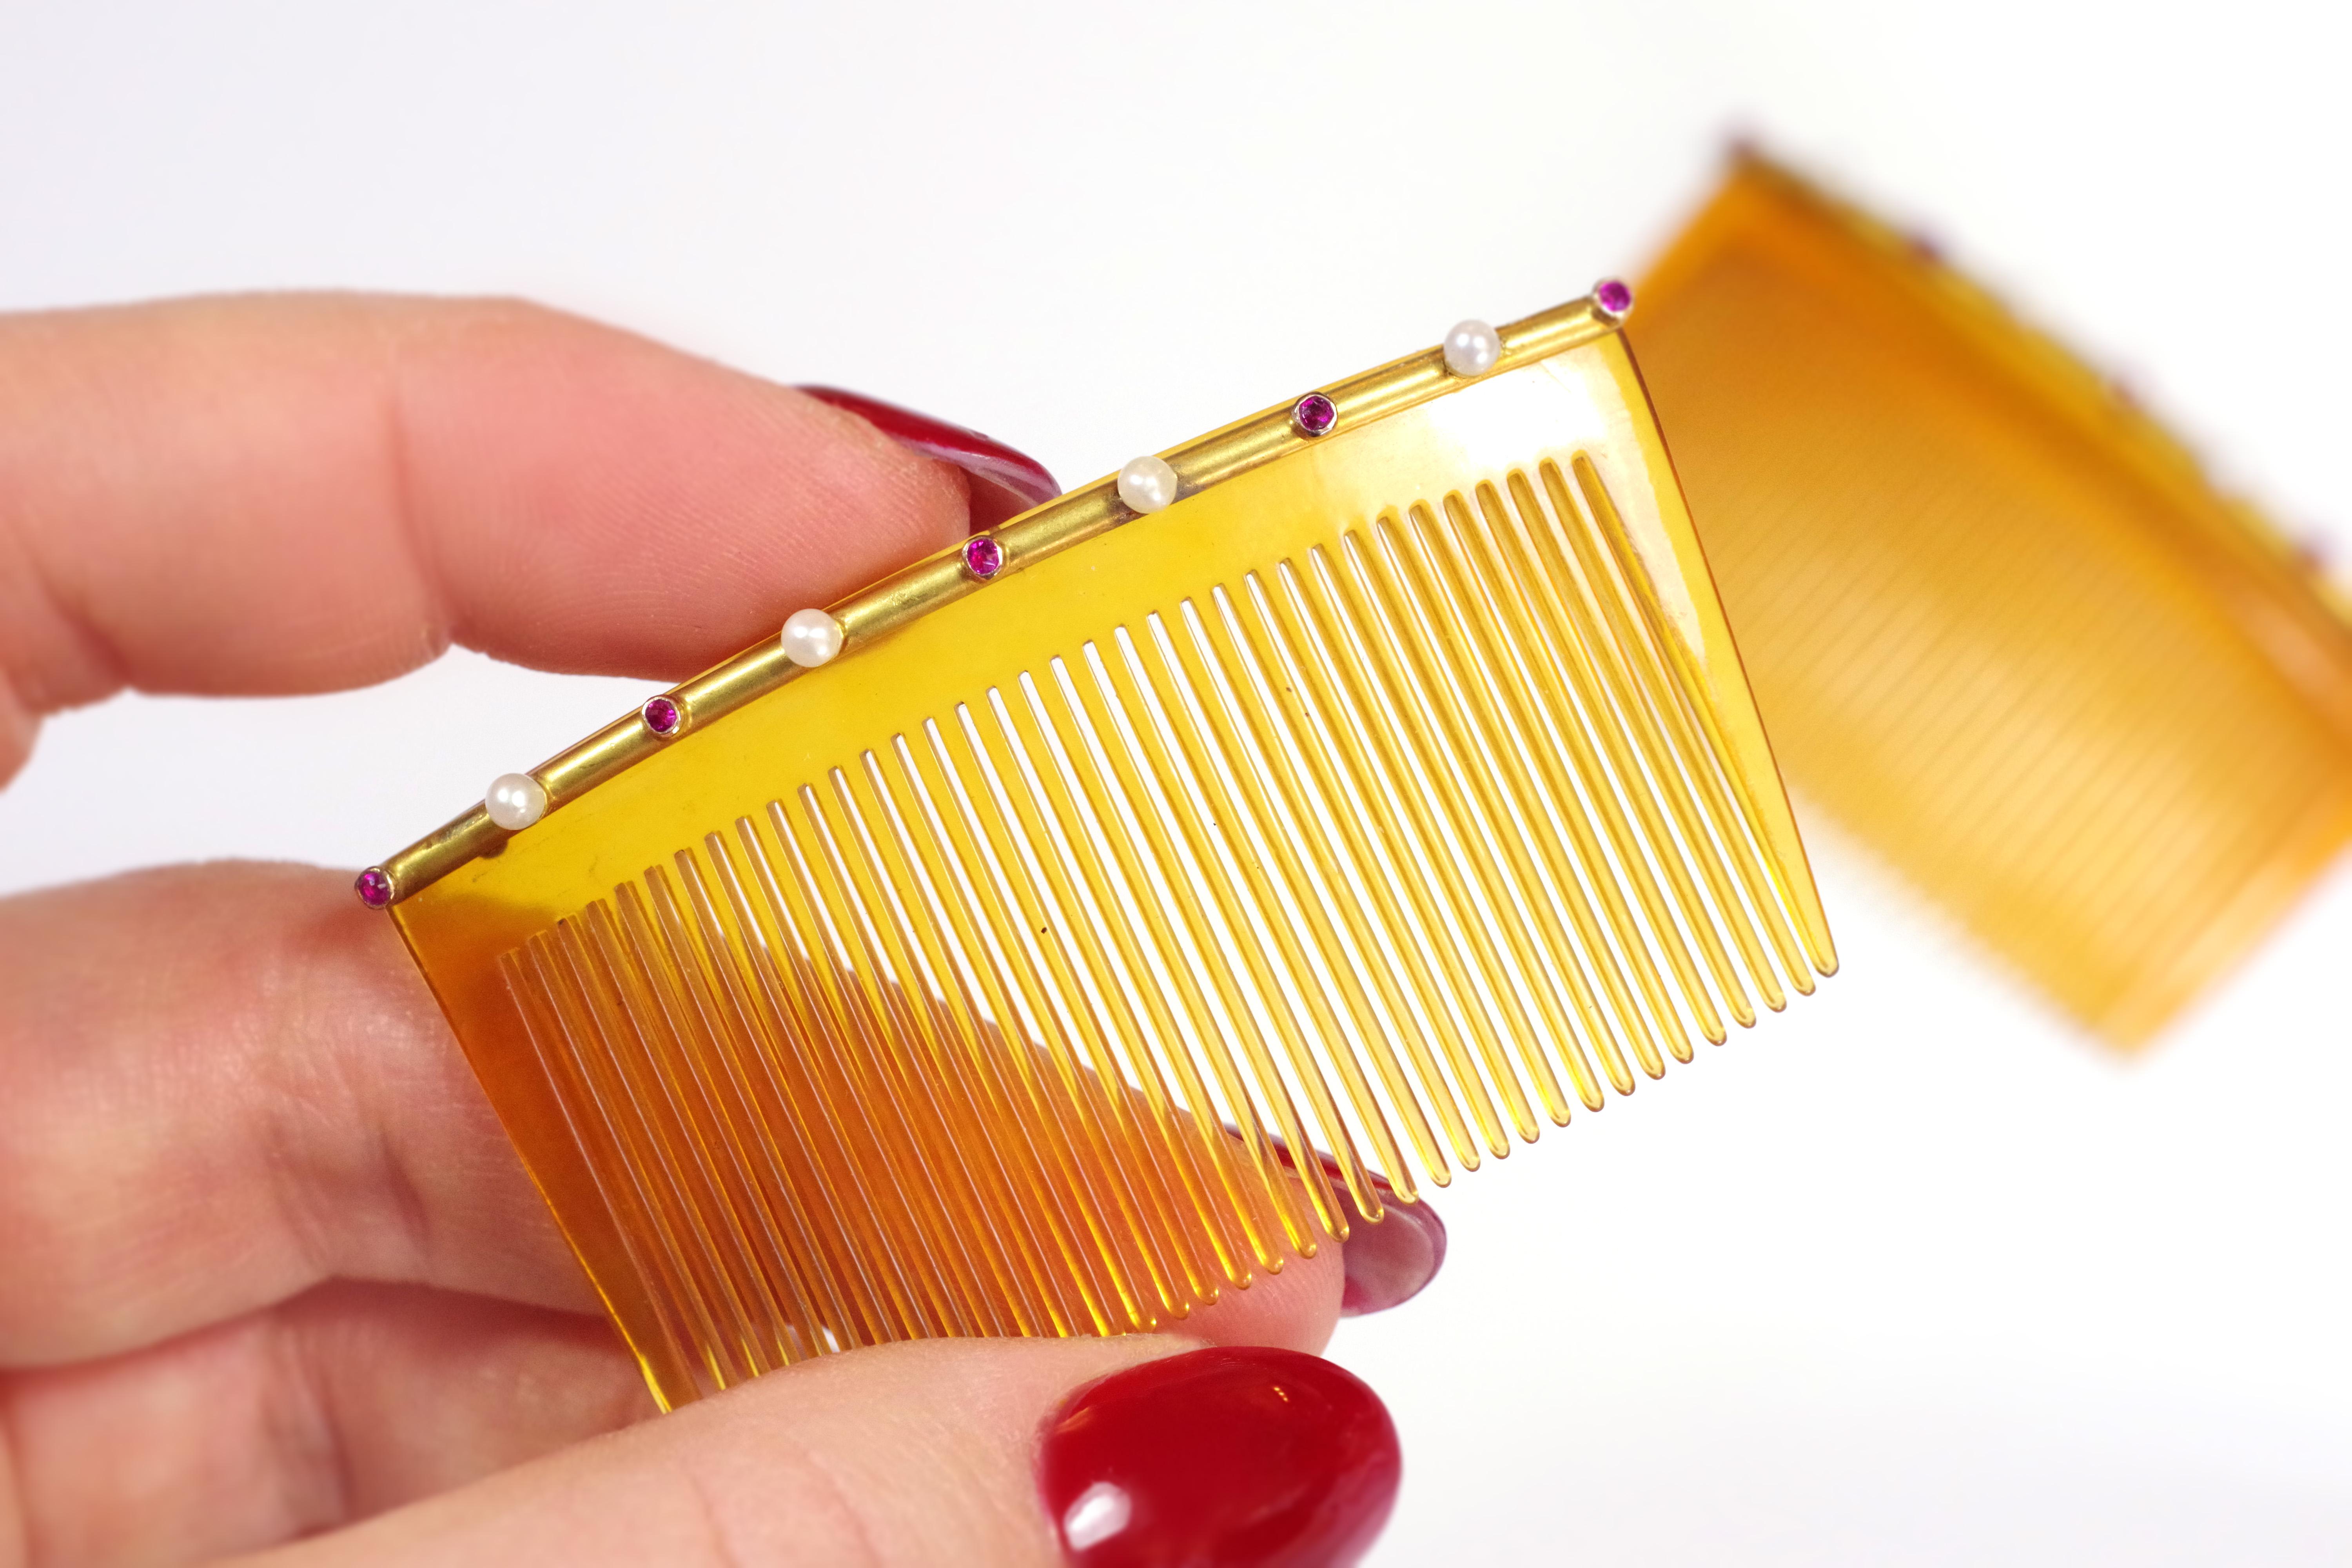 Gold ruby wedding combs in 14 karat yellow gold. Pair of hair combs decorated with a gold line applied on a structure of blond organic matter. The gold line is set with five round rubies, alternating with four fine pearls. One comb has 36 teeth.